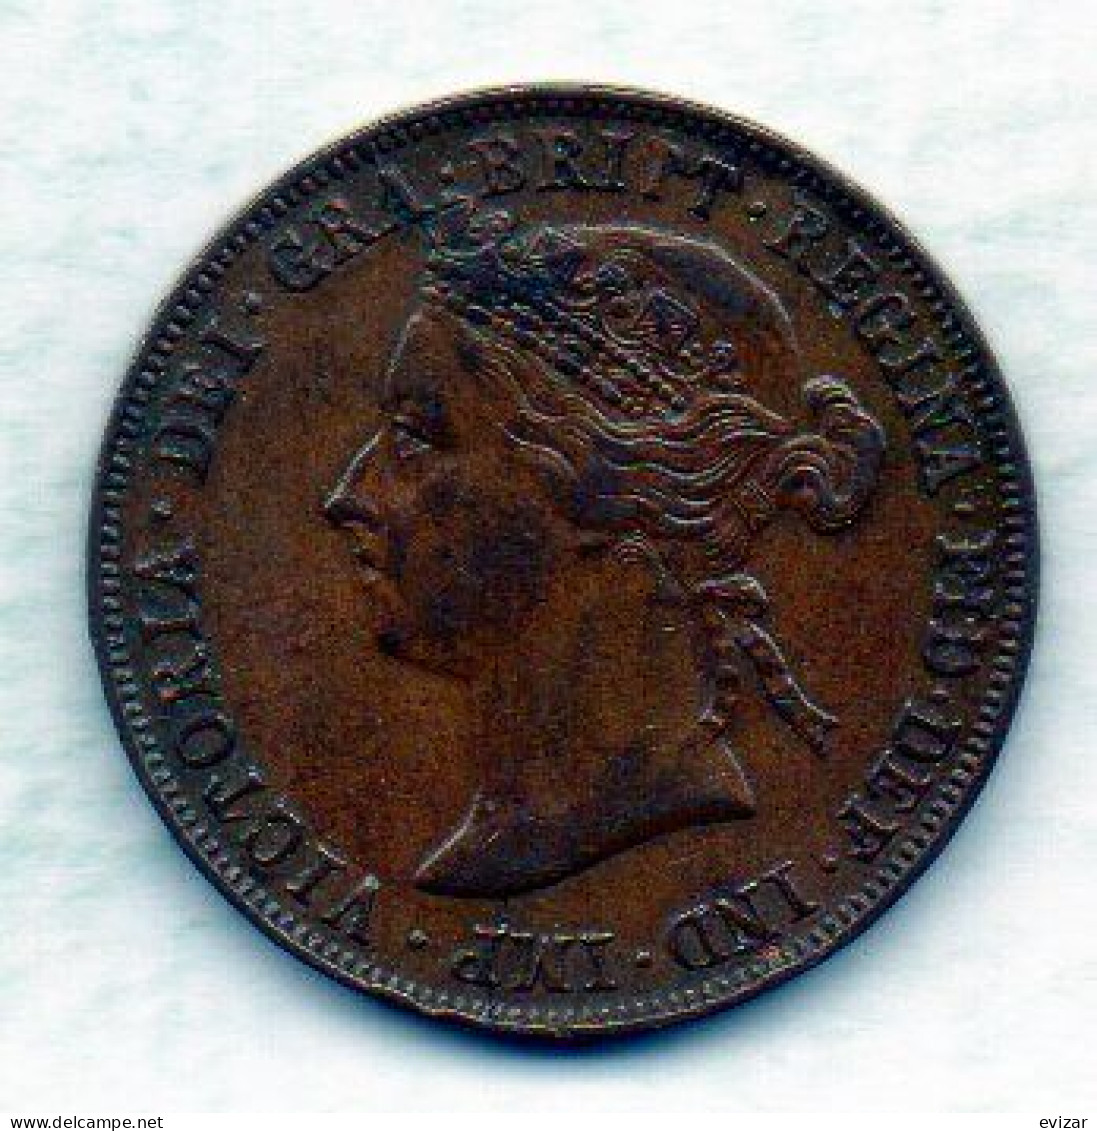 BRITISH EAST AFRICA, 1 Pice, Bronze, Year 1898, KM # 1 - Colonia Británica